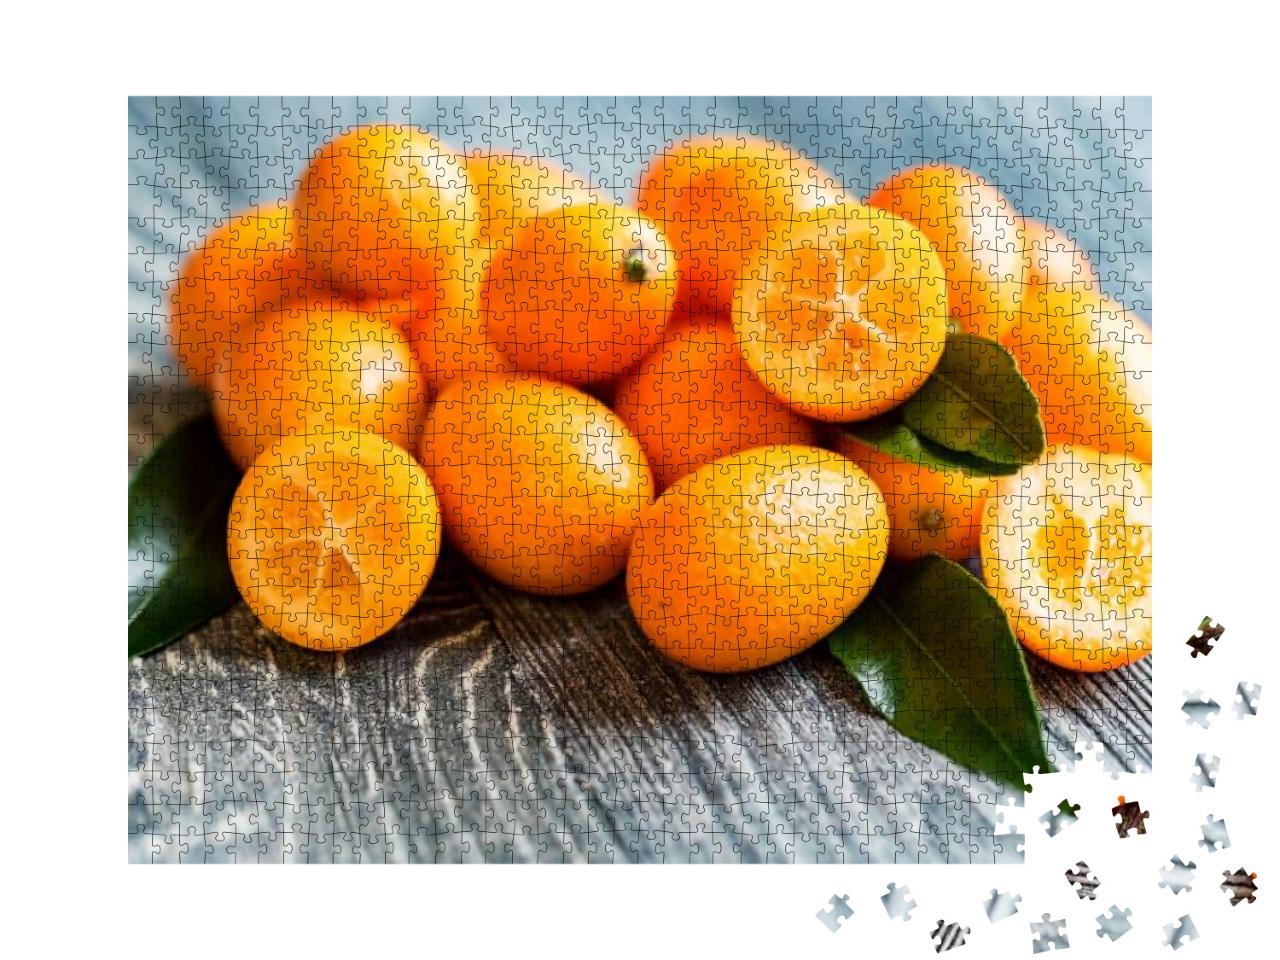 Kumquat or Cumquat on Wooden Table... Jigsaw Puzzle with 1000 pieces